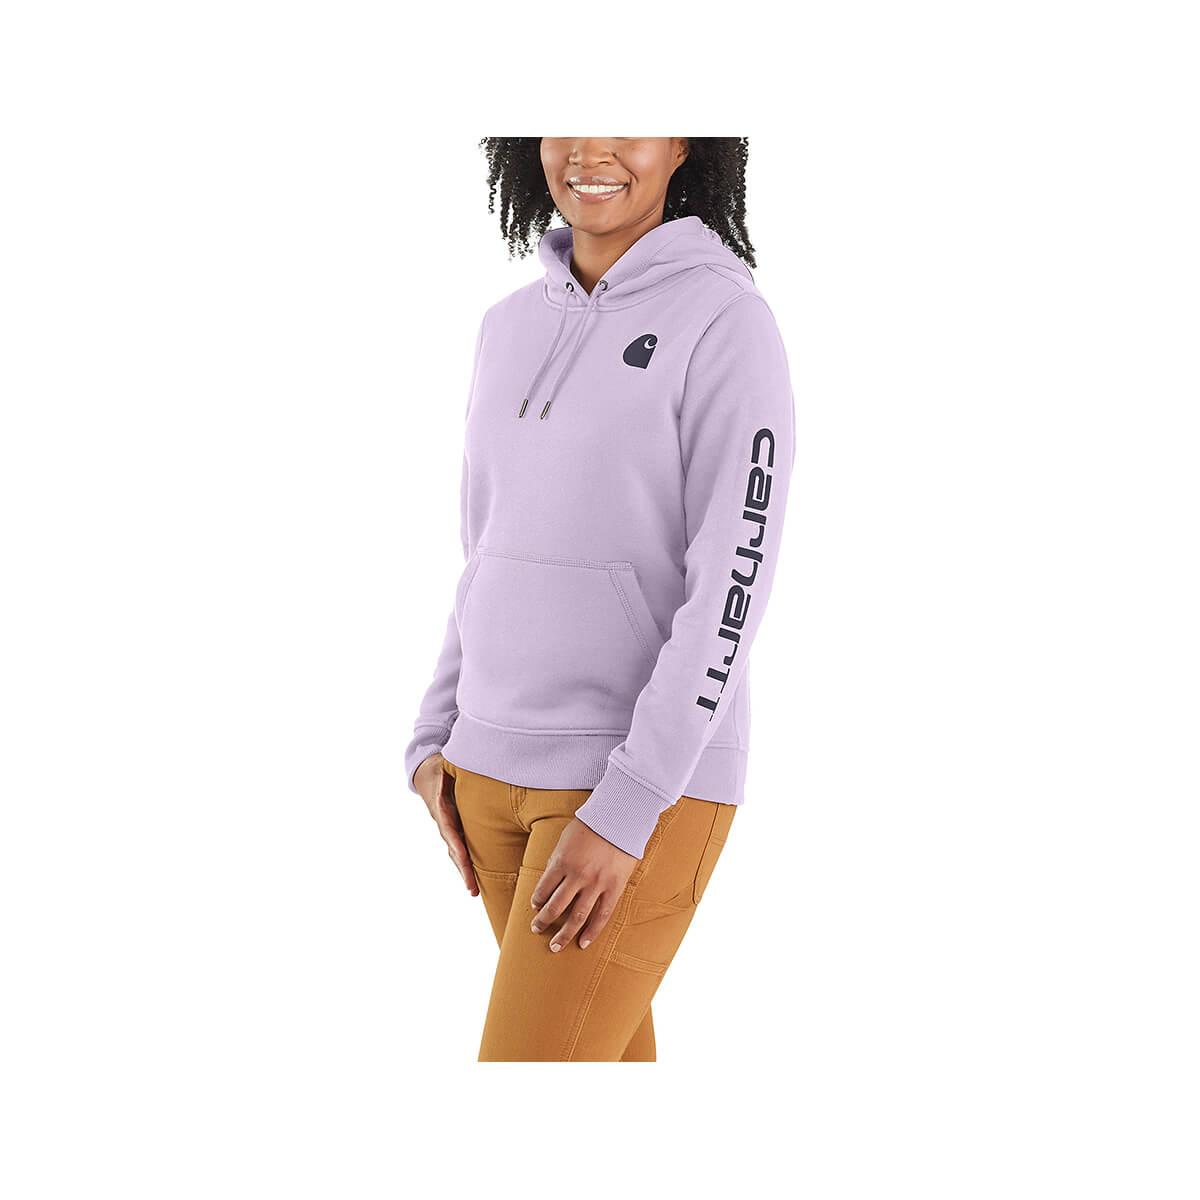  Women's Relaxed Fit Midweight Logo Long Sleeve Graphic Sweatshirt